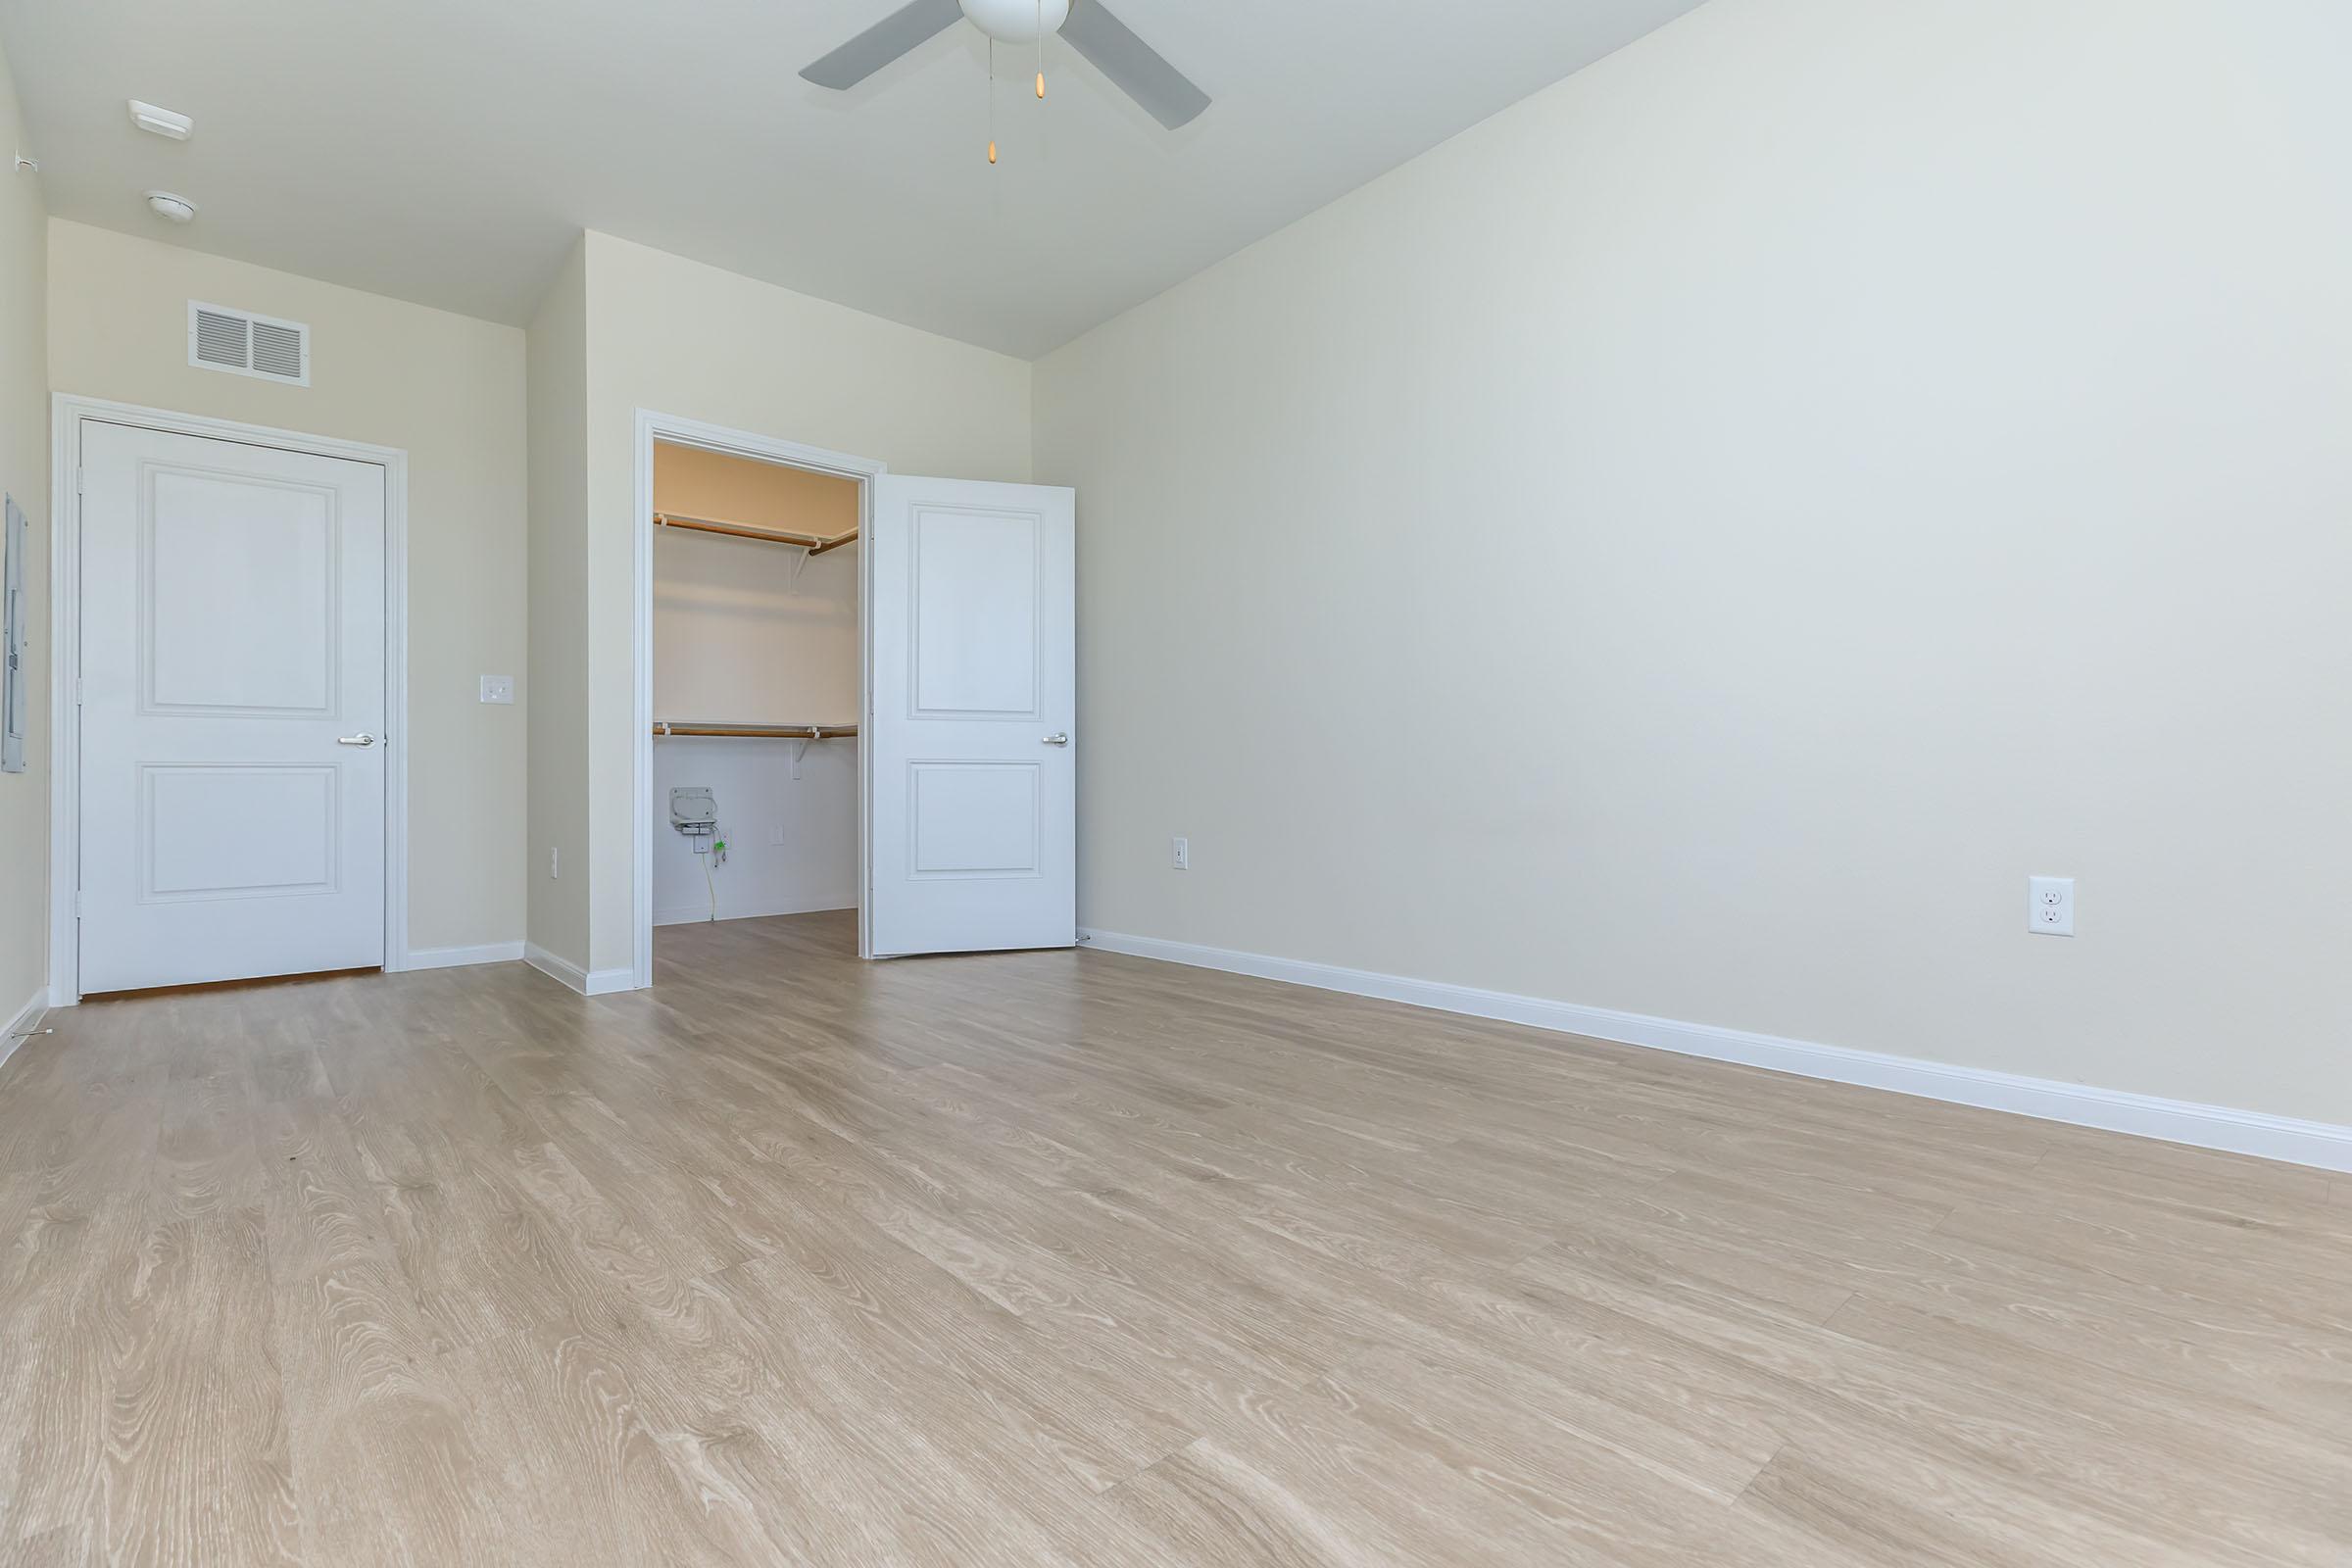 Two Bedroom Senior Apartments in Pflugerville TX - Legacy Ranch at Dessau East - Spacious Bedroom with Sleek Wood-Style Flooring, Large Closet, and a Ceiling Fan